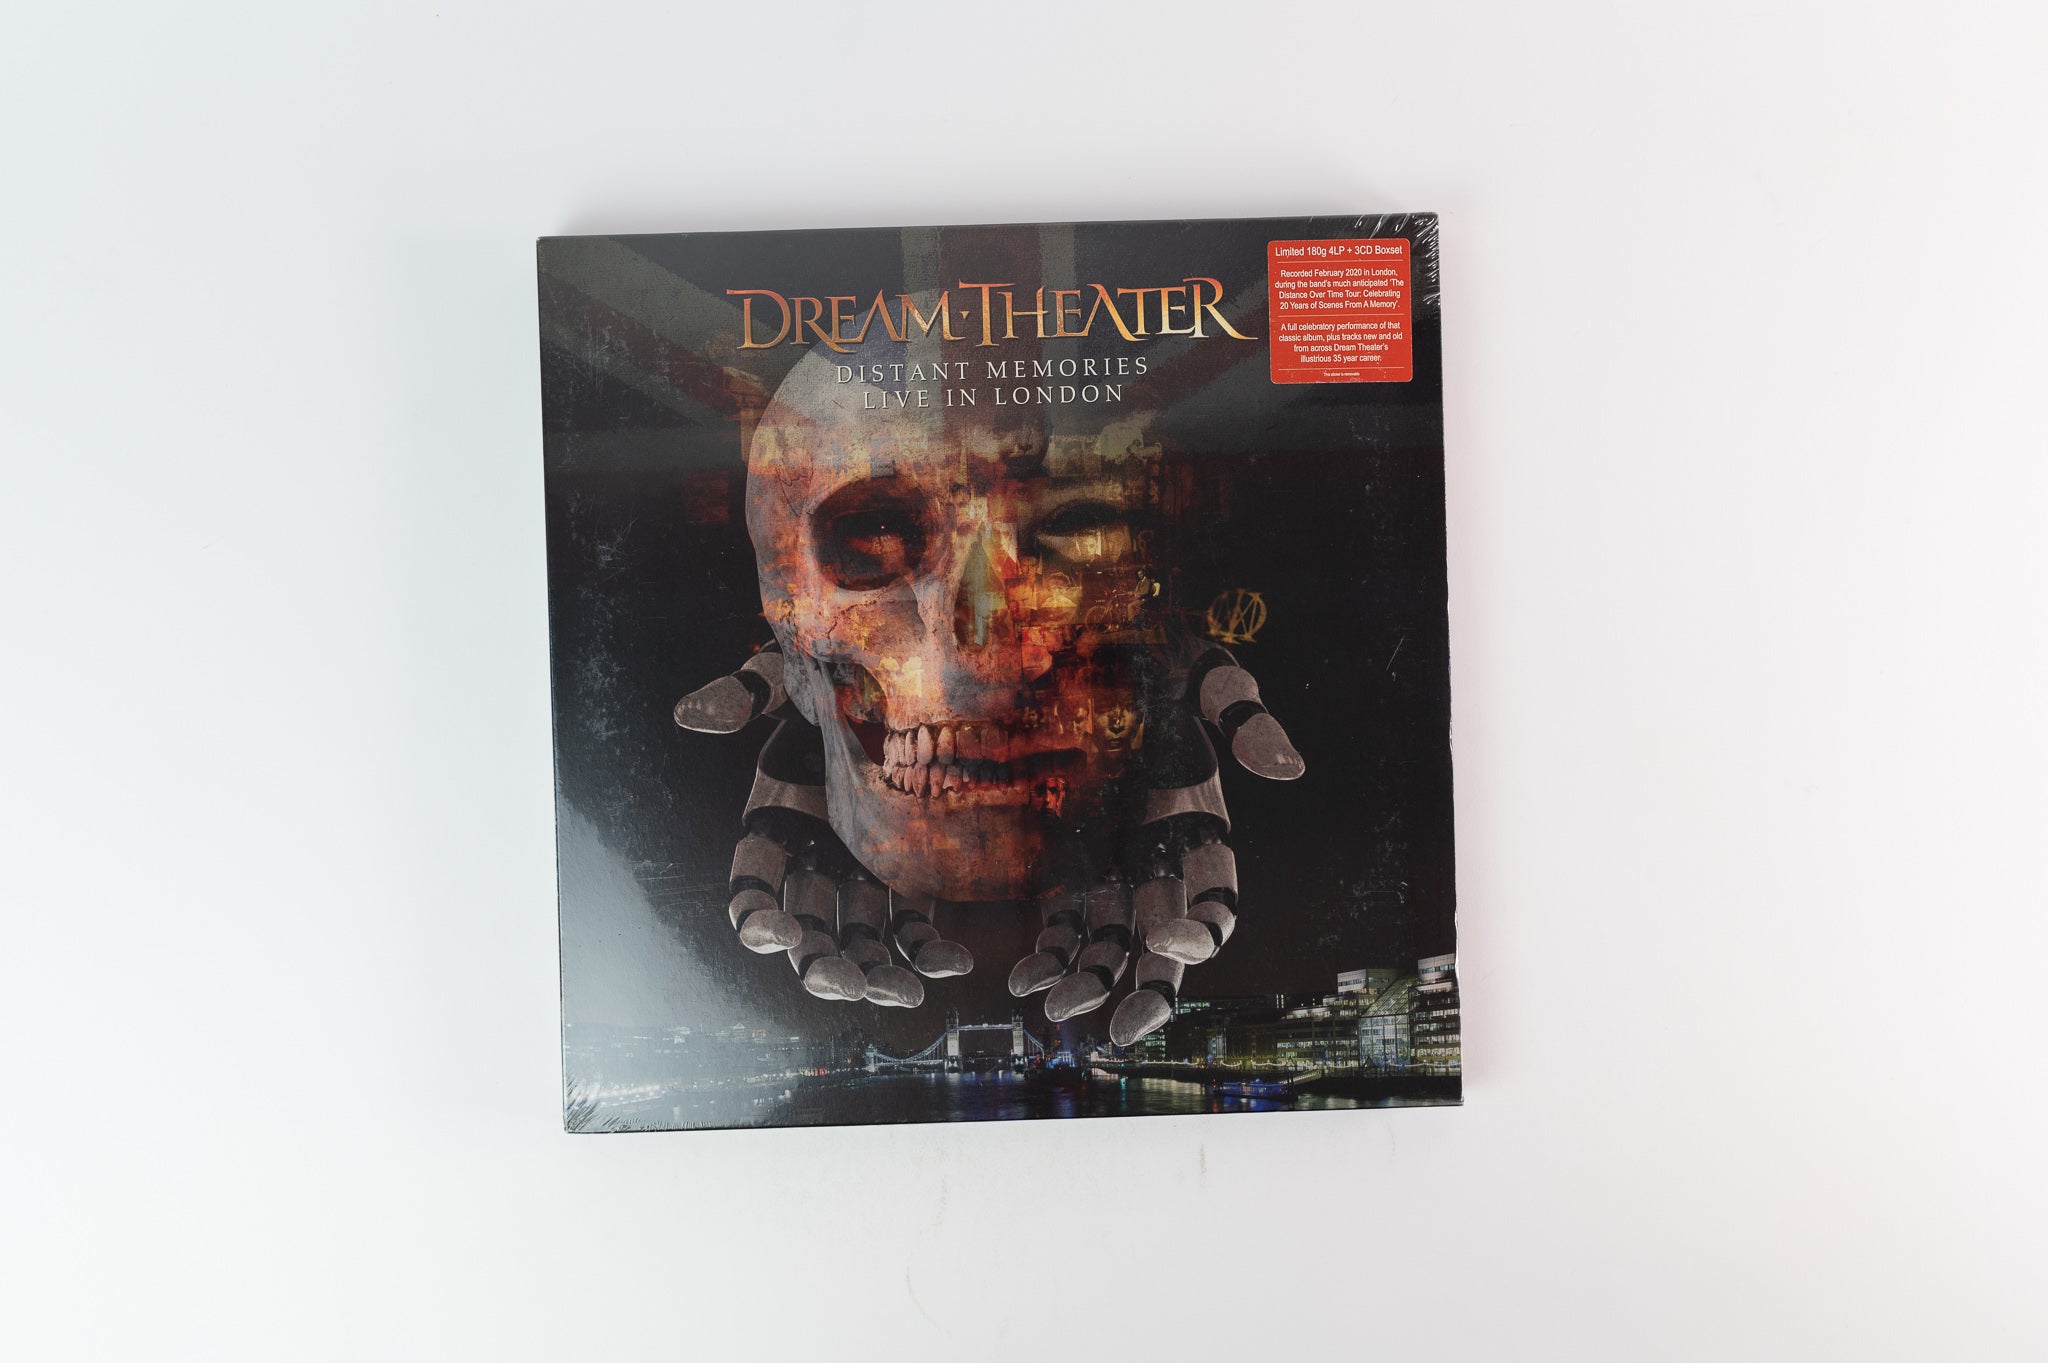 Dream Theater - Distant Memories - Live In London on Inside Out European Box Set Sealed